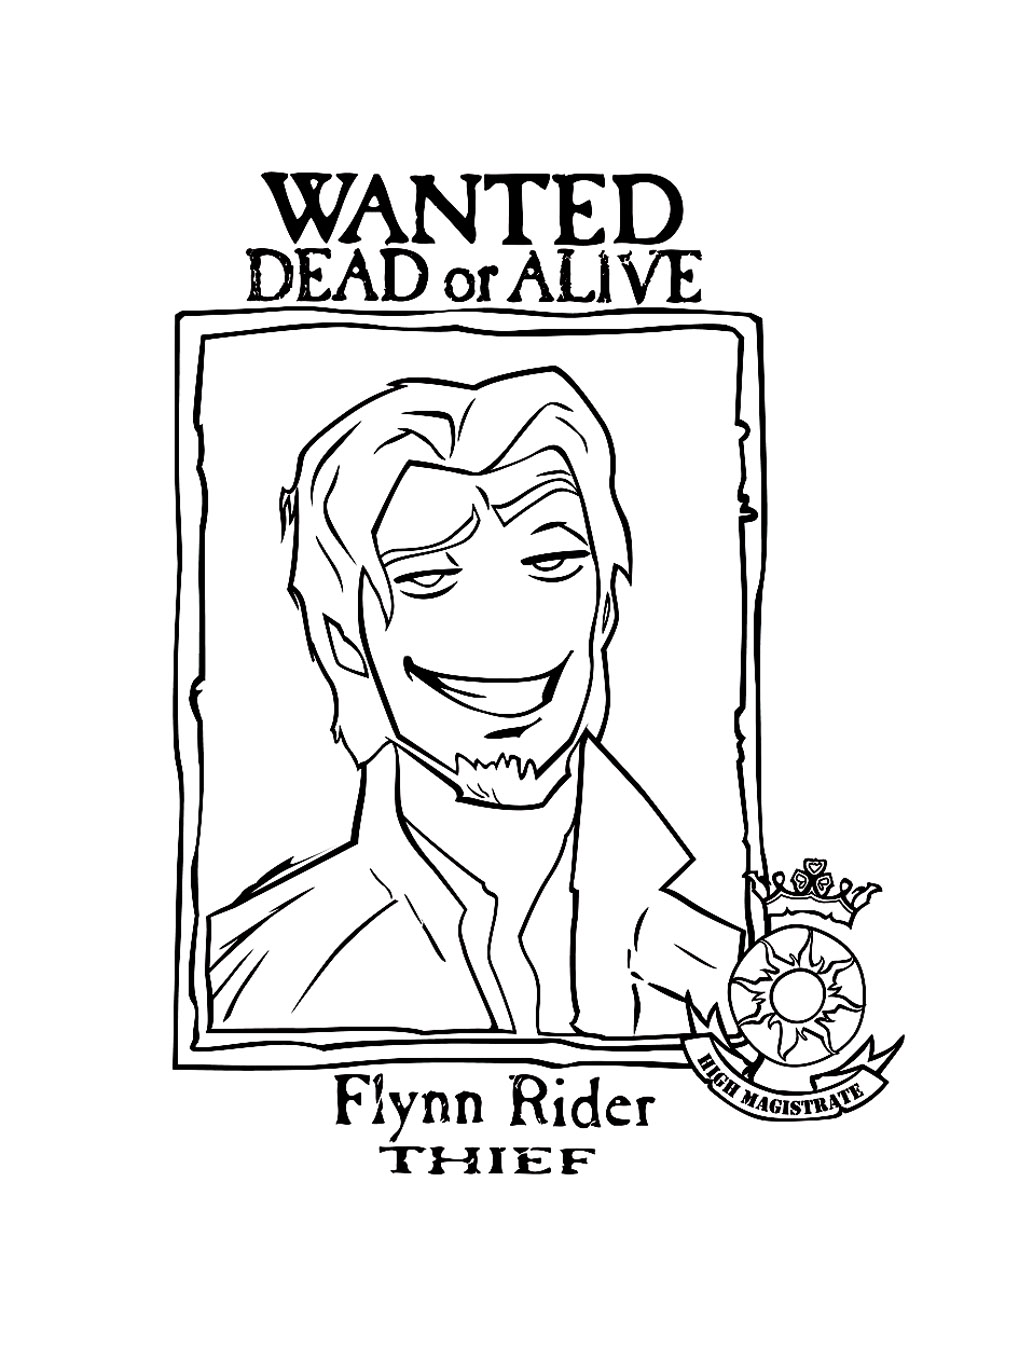 Funny Tangled coloring page for kids : Flynn Rider Wanted Dead or Alive !